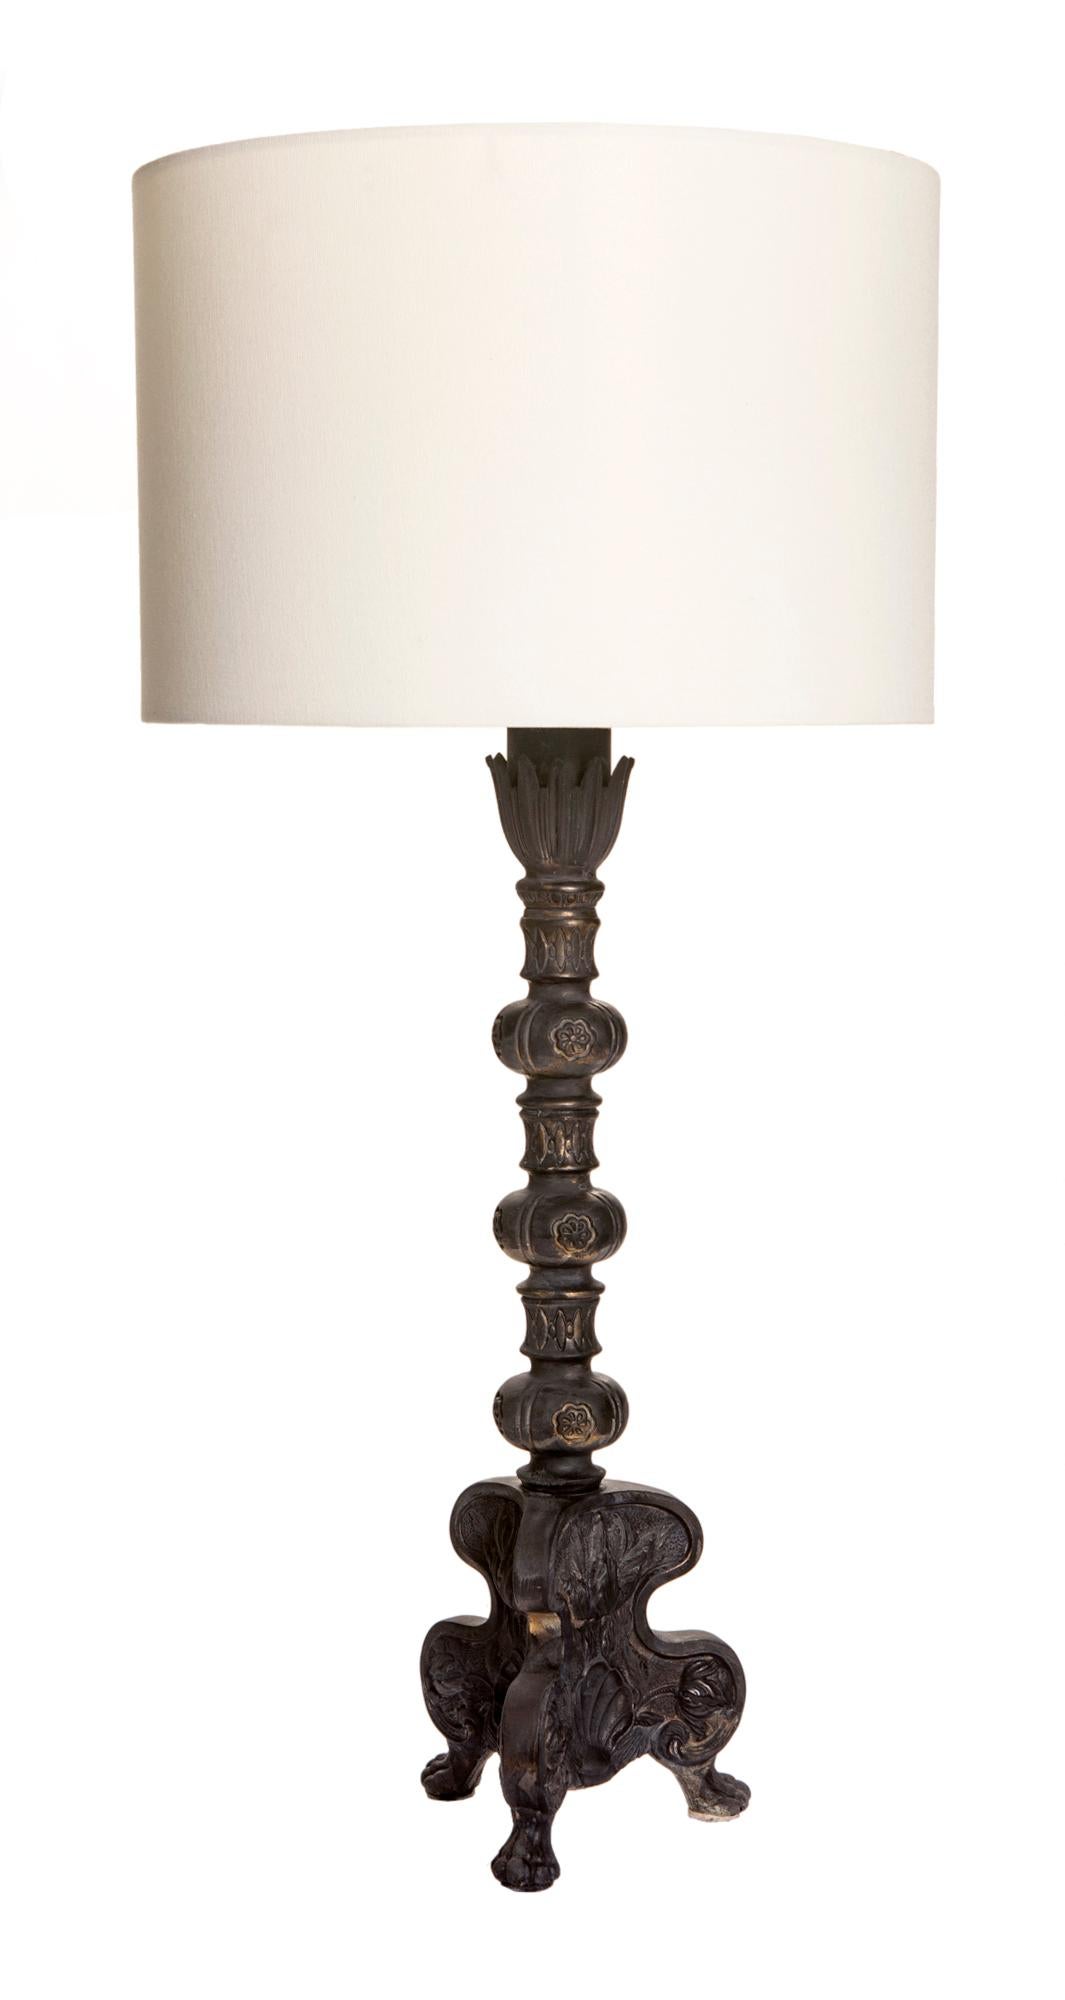 Hand painted cast white metal candlestick lamp with shell motif & decorative column which sit on three decorative feet, The lampshade is for display only.

